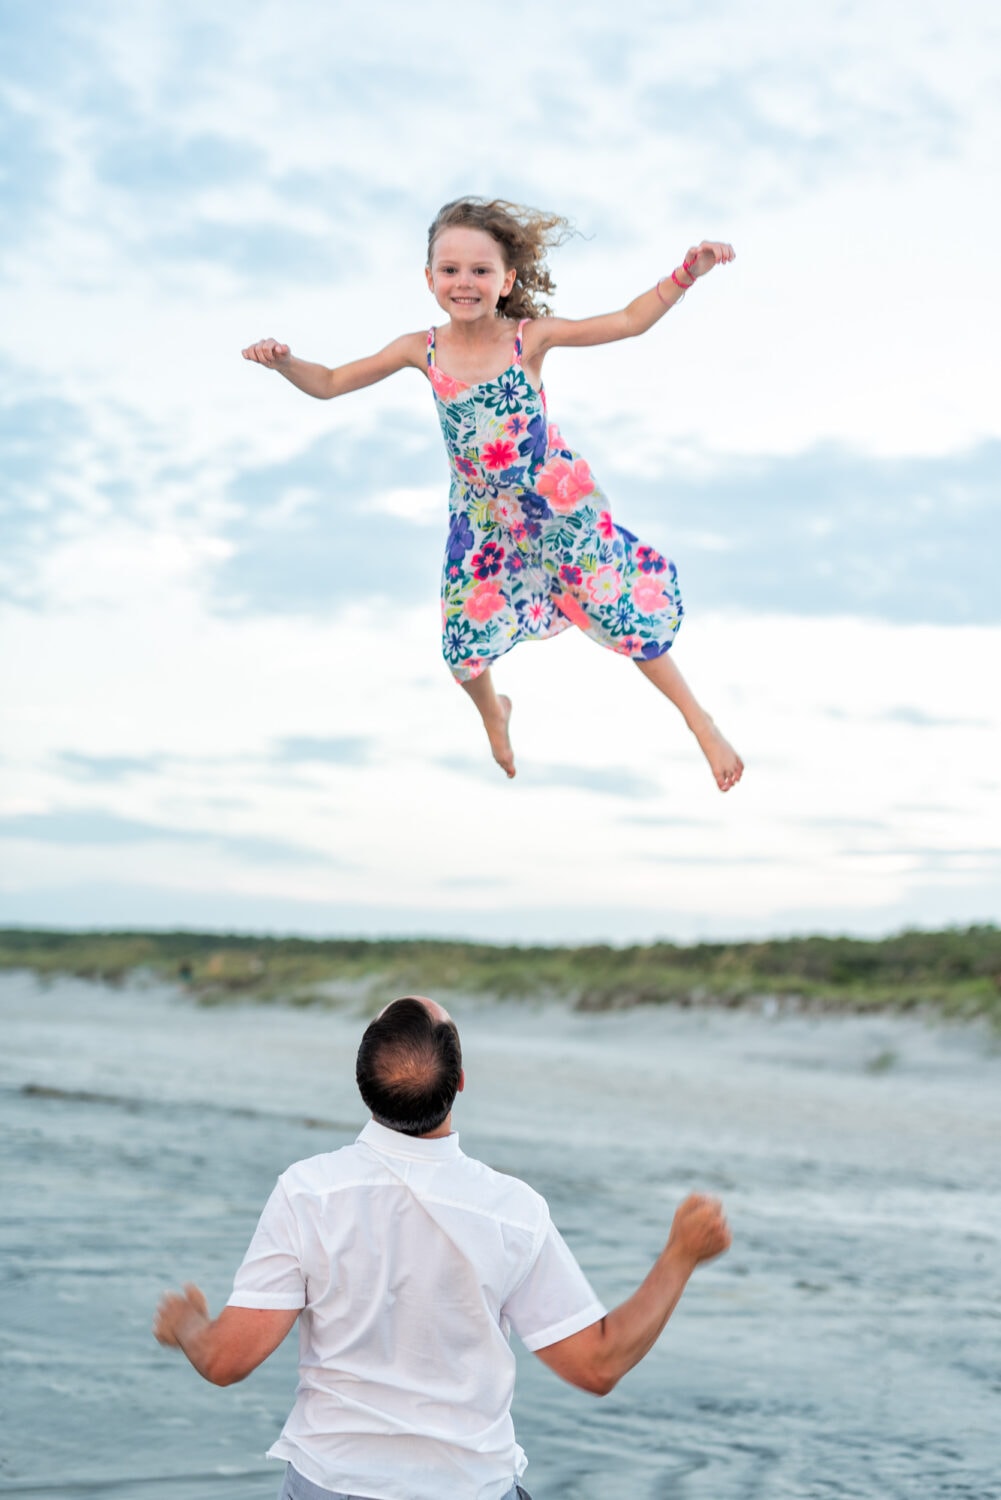 Some dads really take throwing the kids in the air seriously! - Huntington Beach State Park